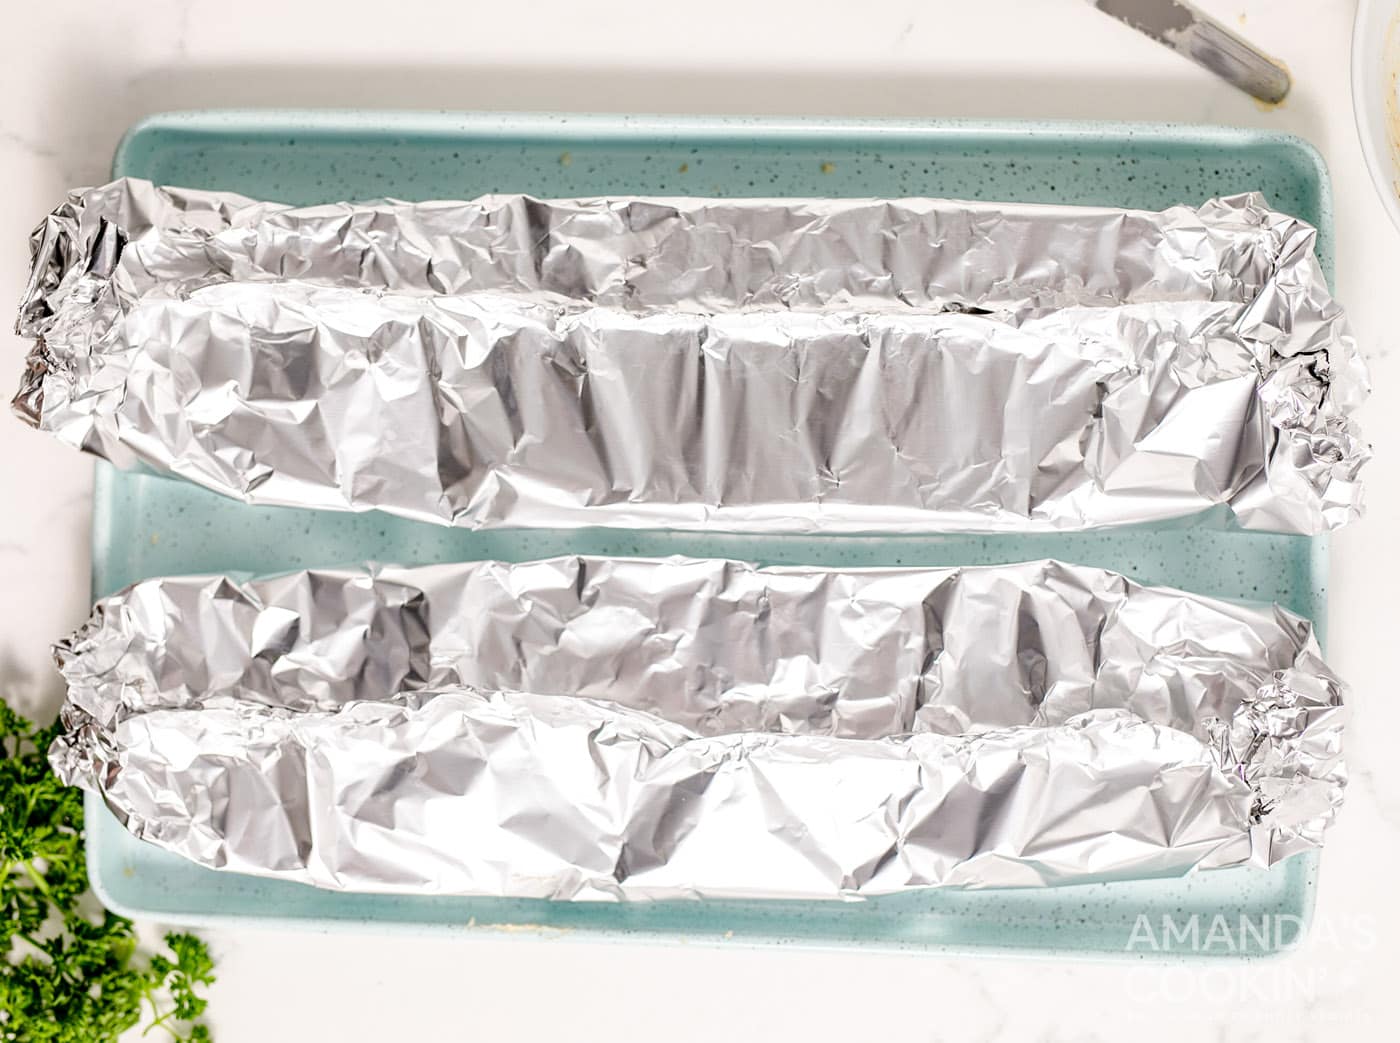 french bread wrapped in aluminum foil